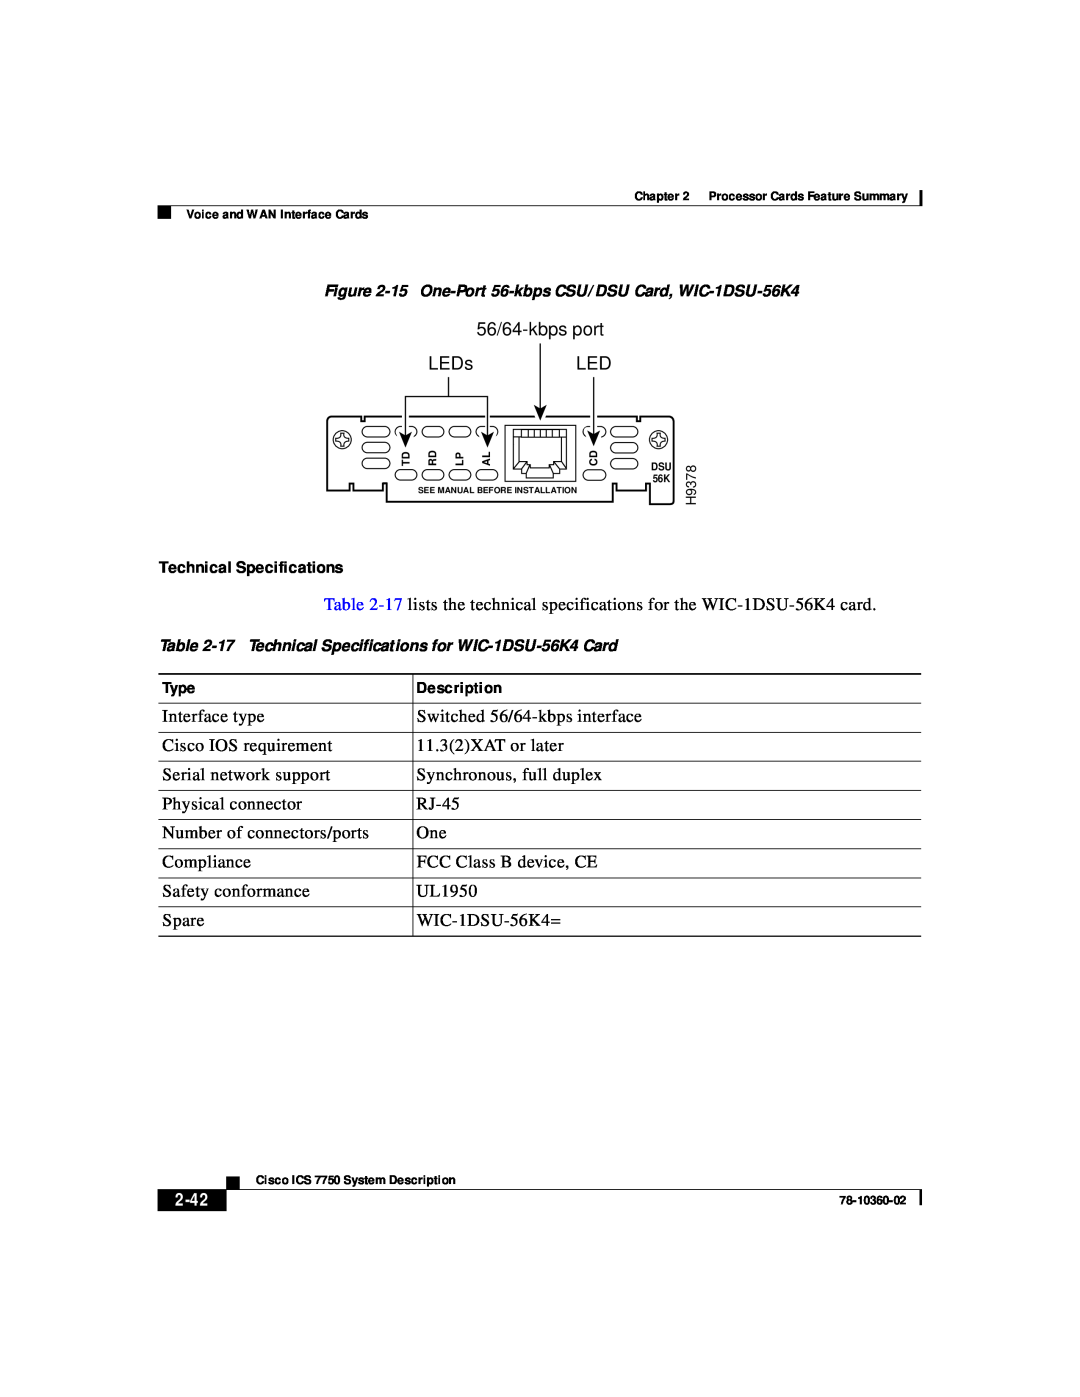 Cisco Systems ICS-7750 manual 56/64-kbps port, LEDs, Technical Specifications, 2-42 